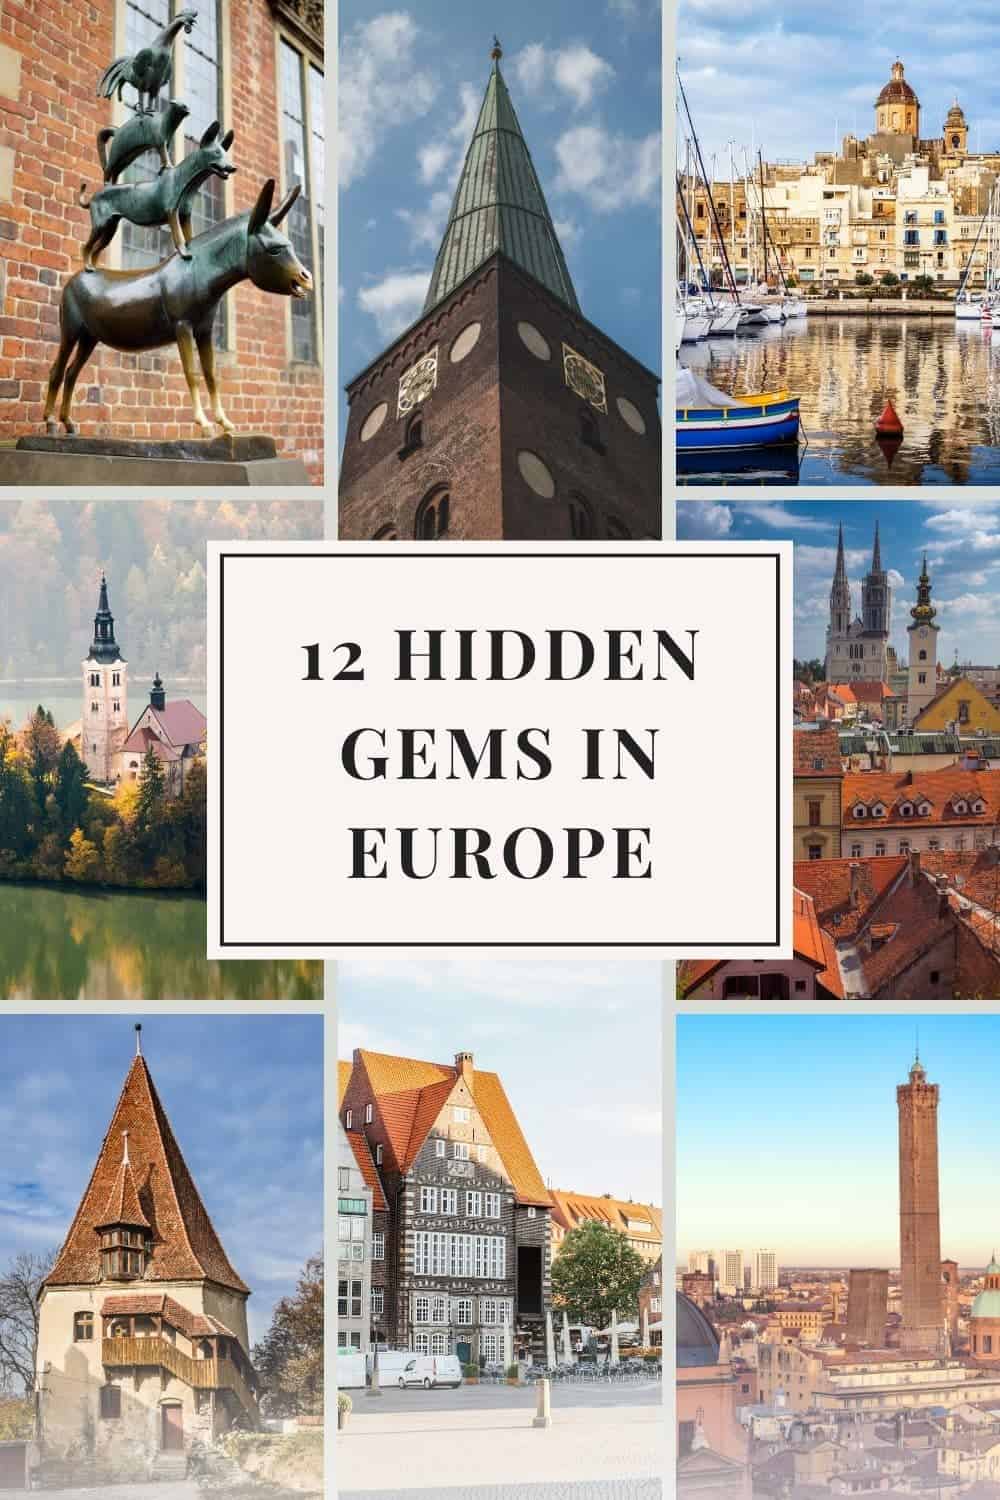 A vivid collage of European secrets, showcasing the red-brick architecture of Toulouse, France, the ancient Alhambra of Granada, Spain, and the cobbled charm of Sighisoara, Romania, each a hidden gem with a story to tell